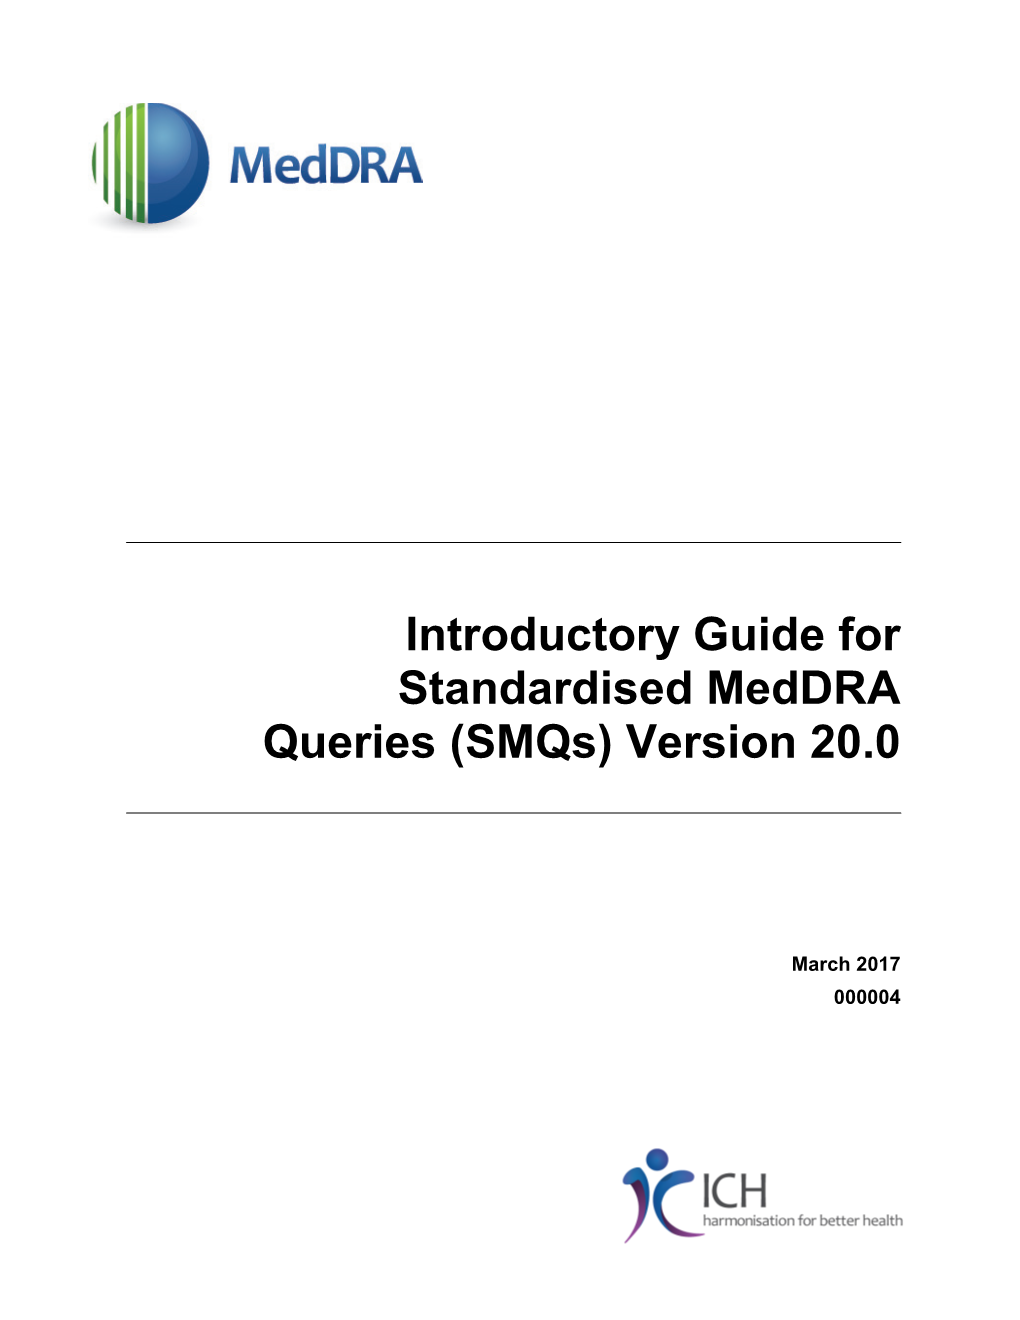 Introductory Guide for Standardised Meddra Queries (Smqs) Version 20.0